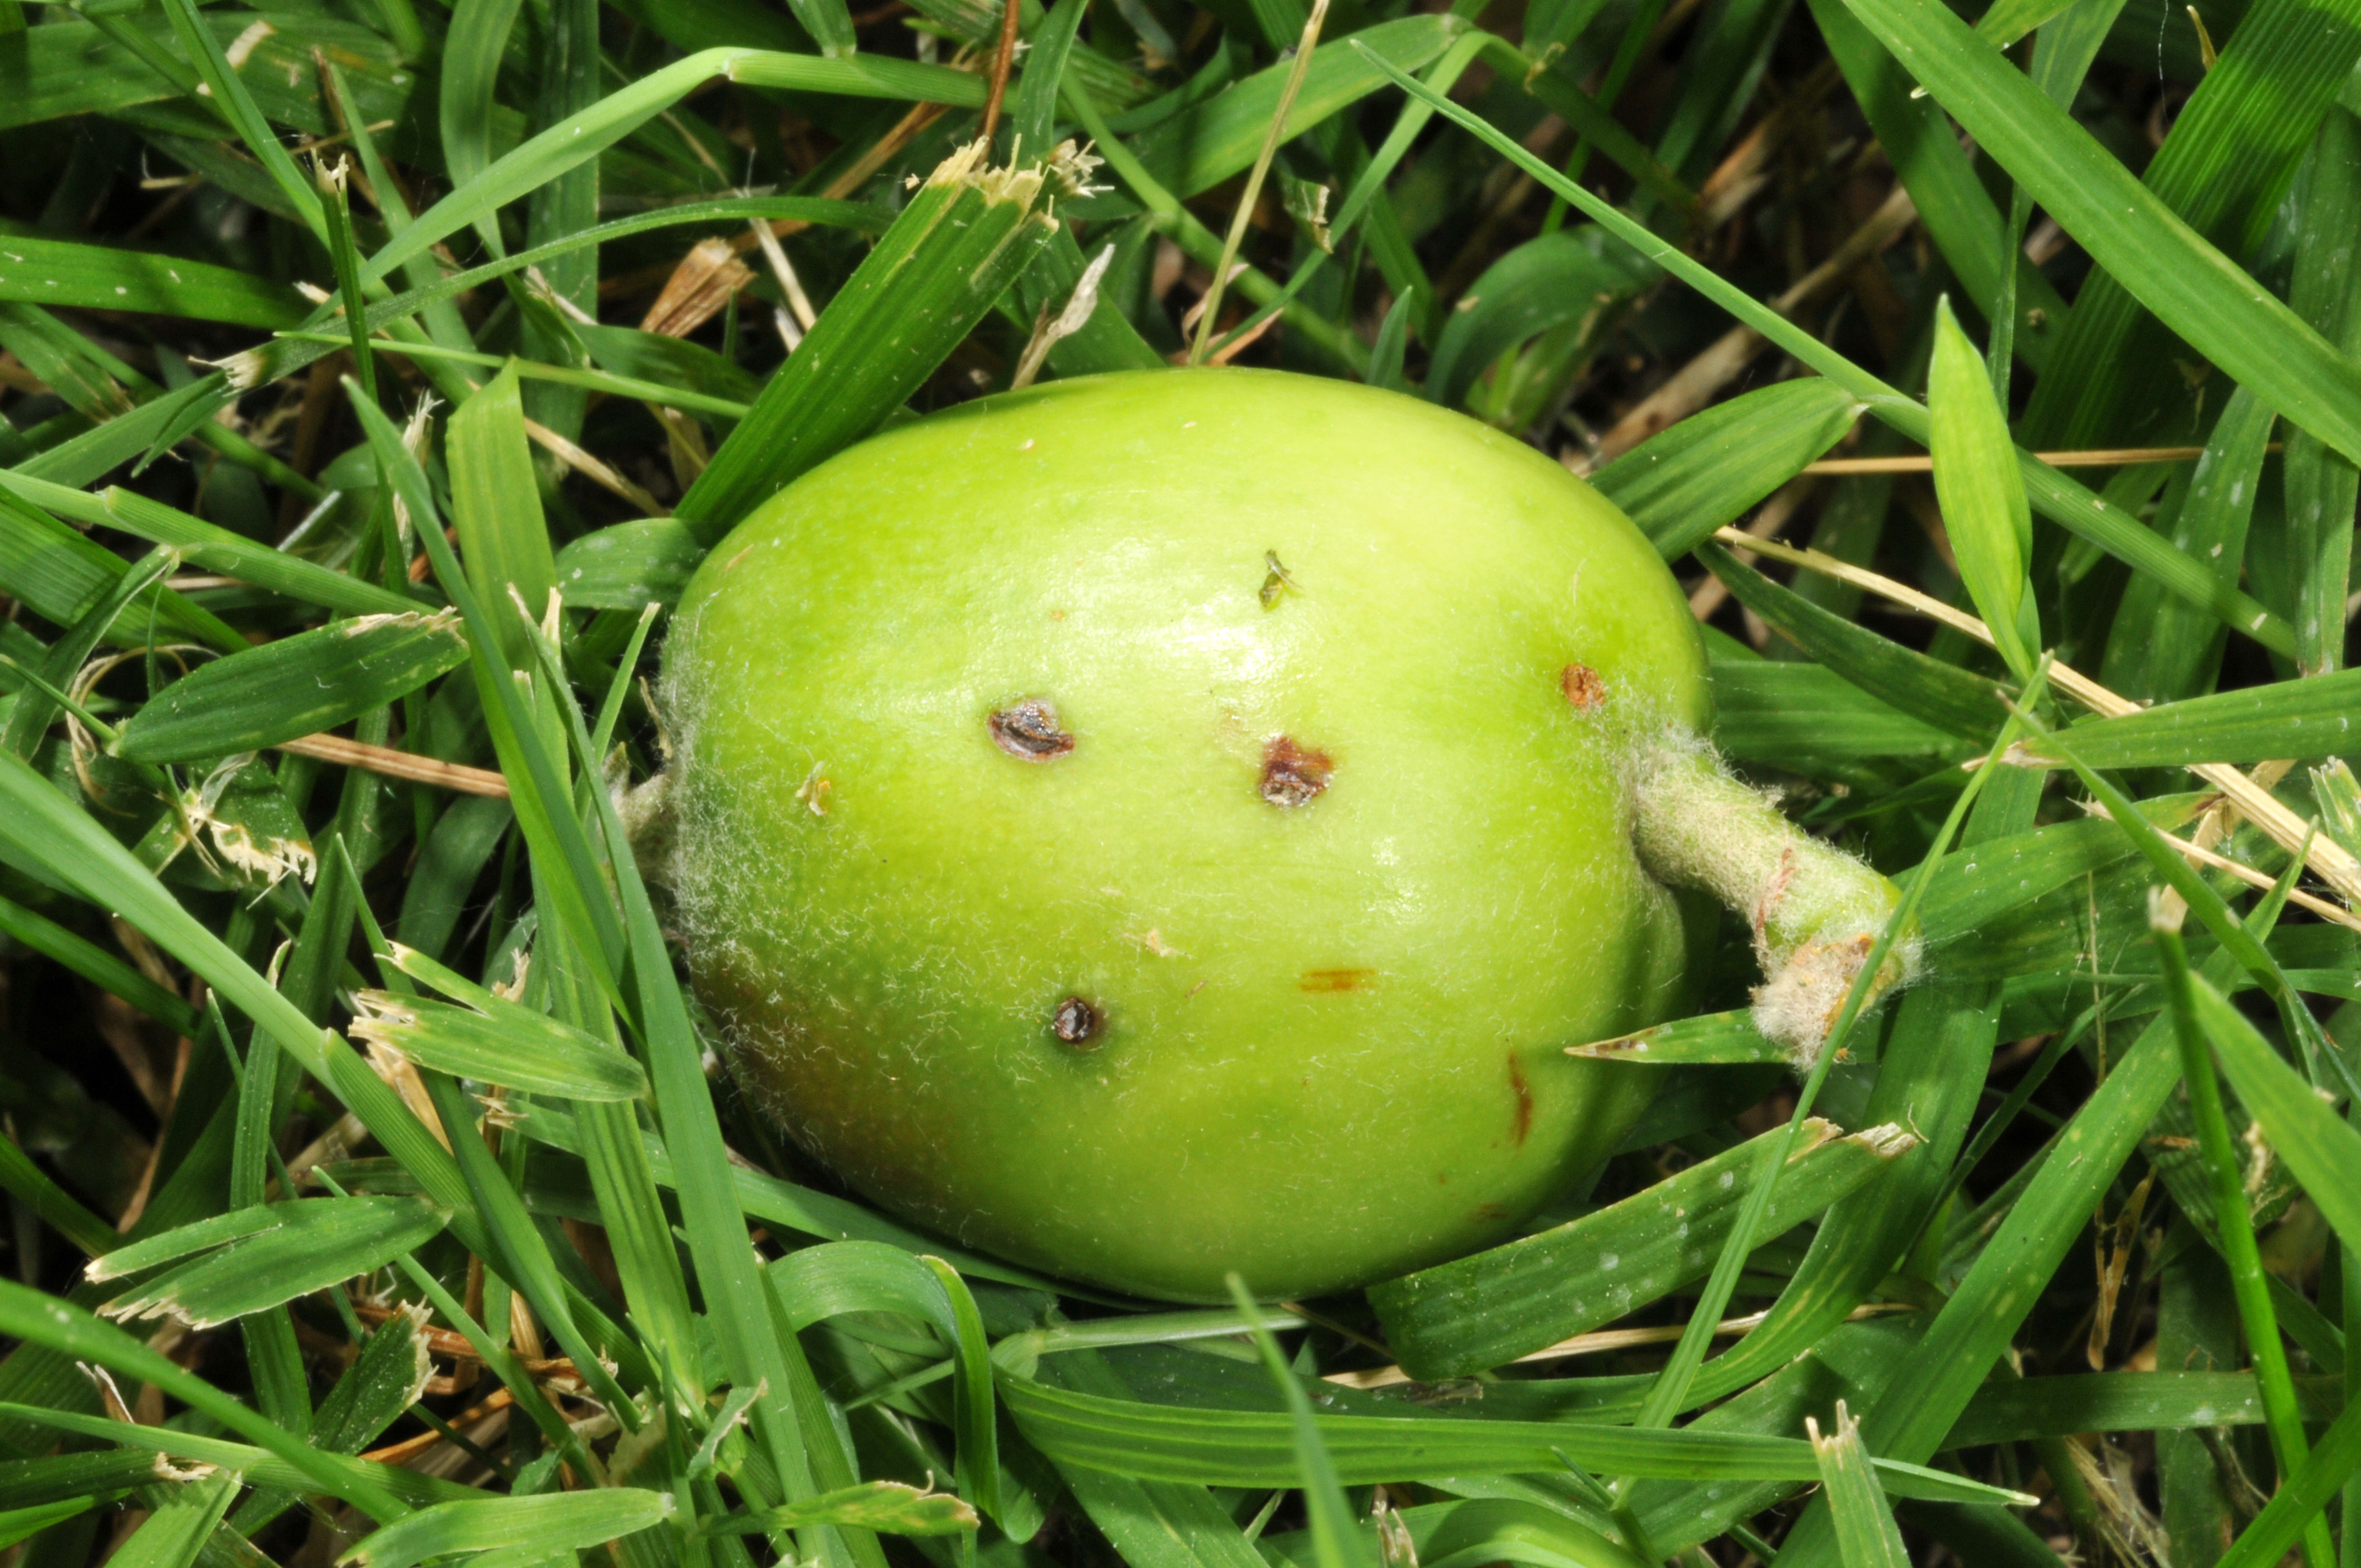 Figure 11. Feeding and egg-laying scars left behind on the surface of an immature apple by plum curculio.(<em>Photo credit: John Obermeyer, Purdue Entomology</em>)